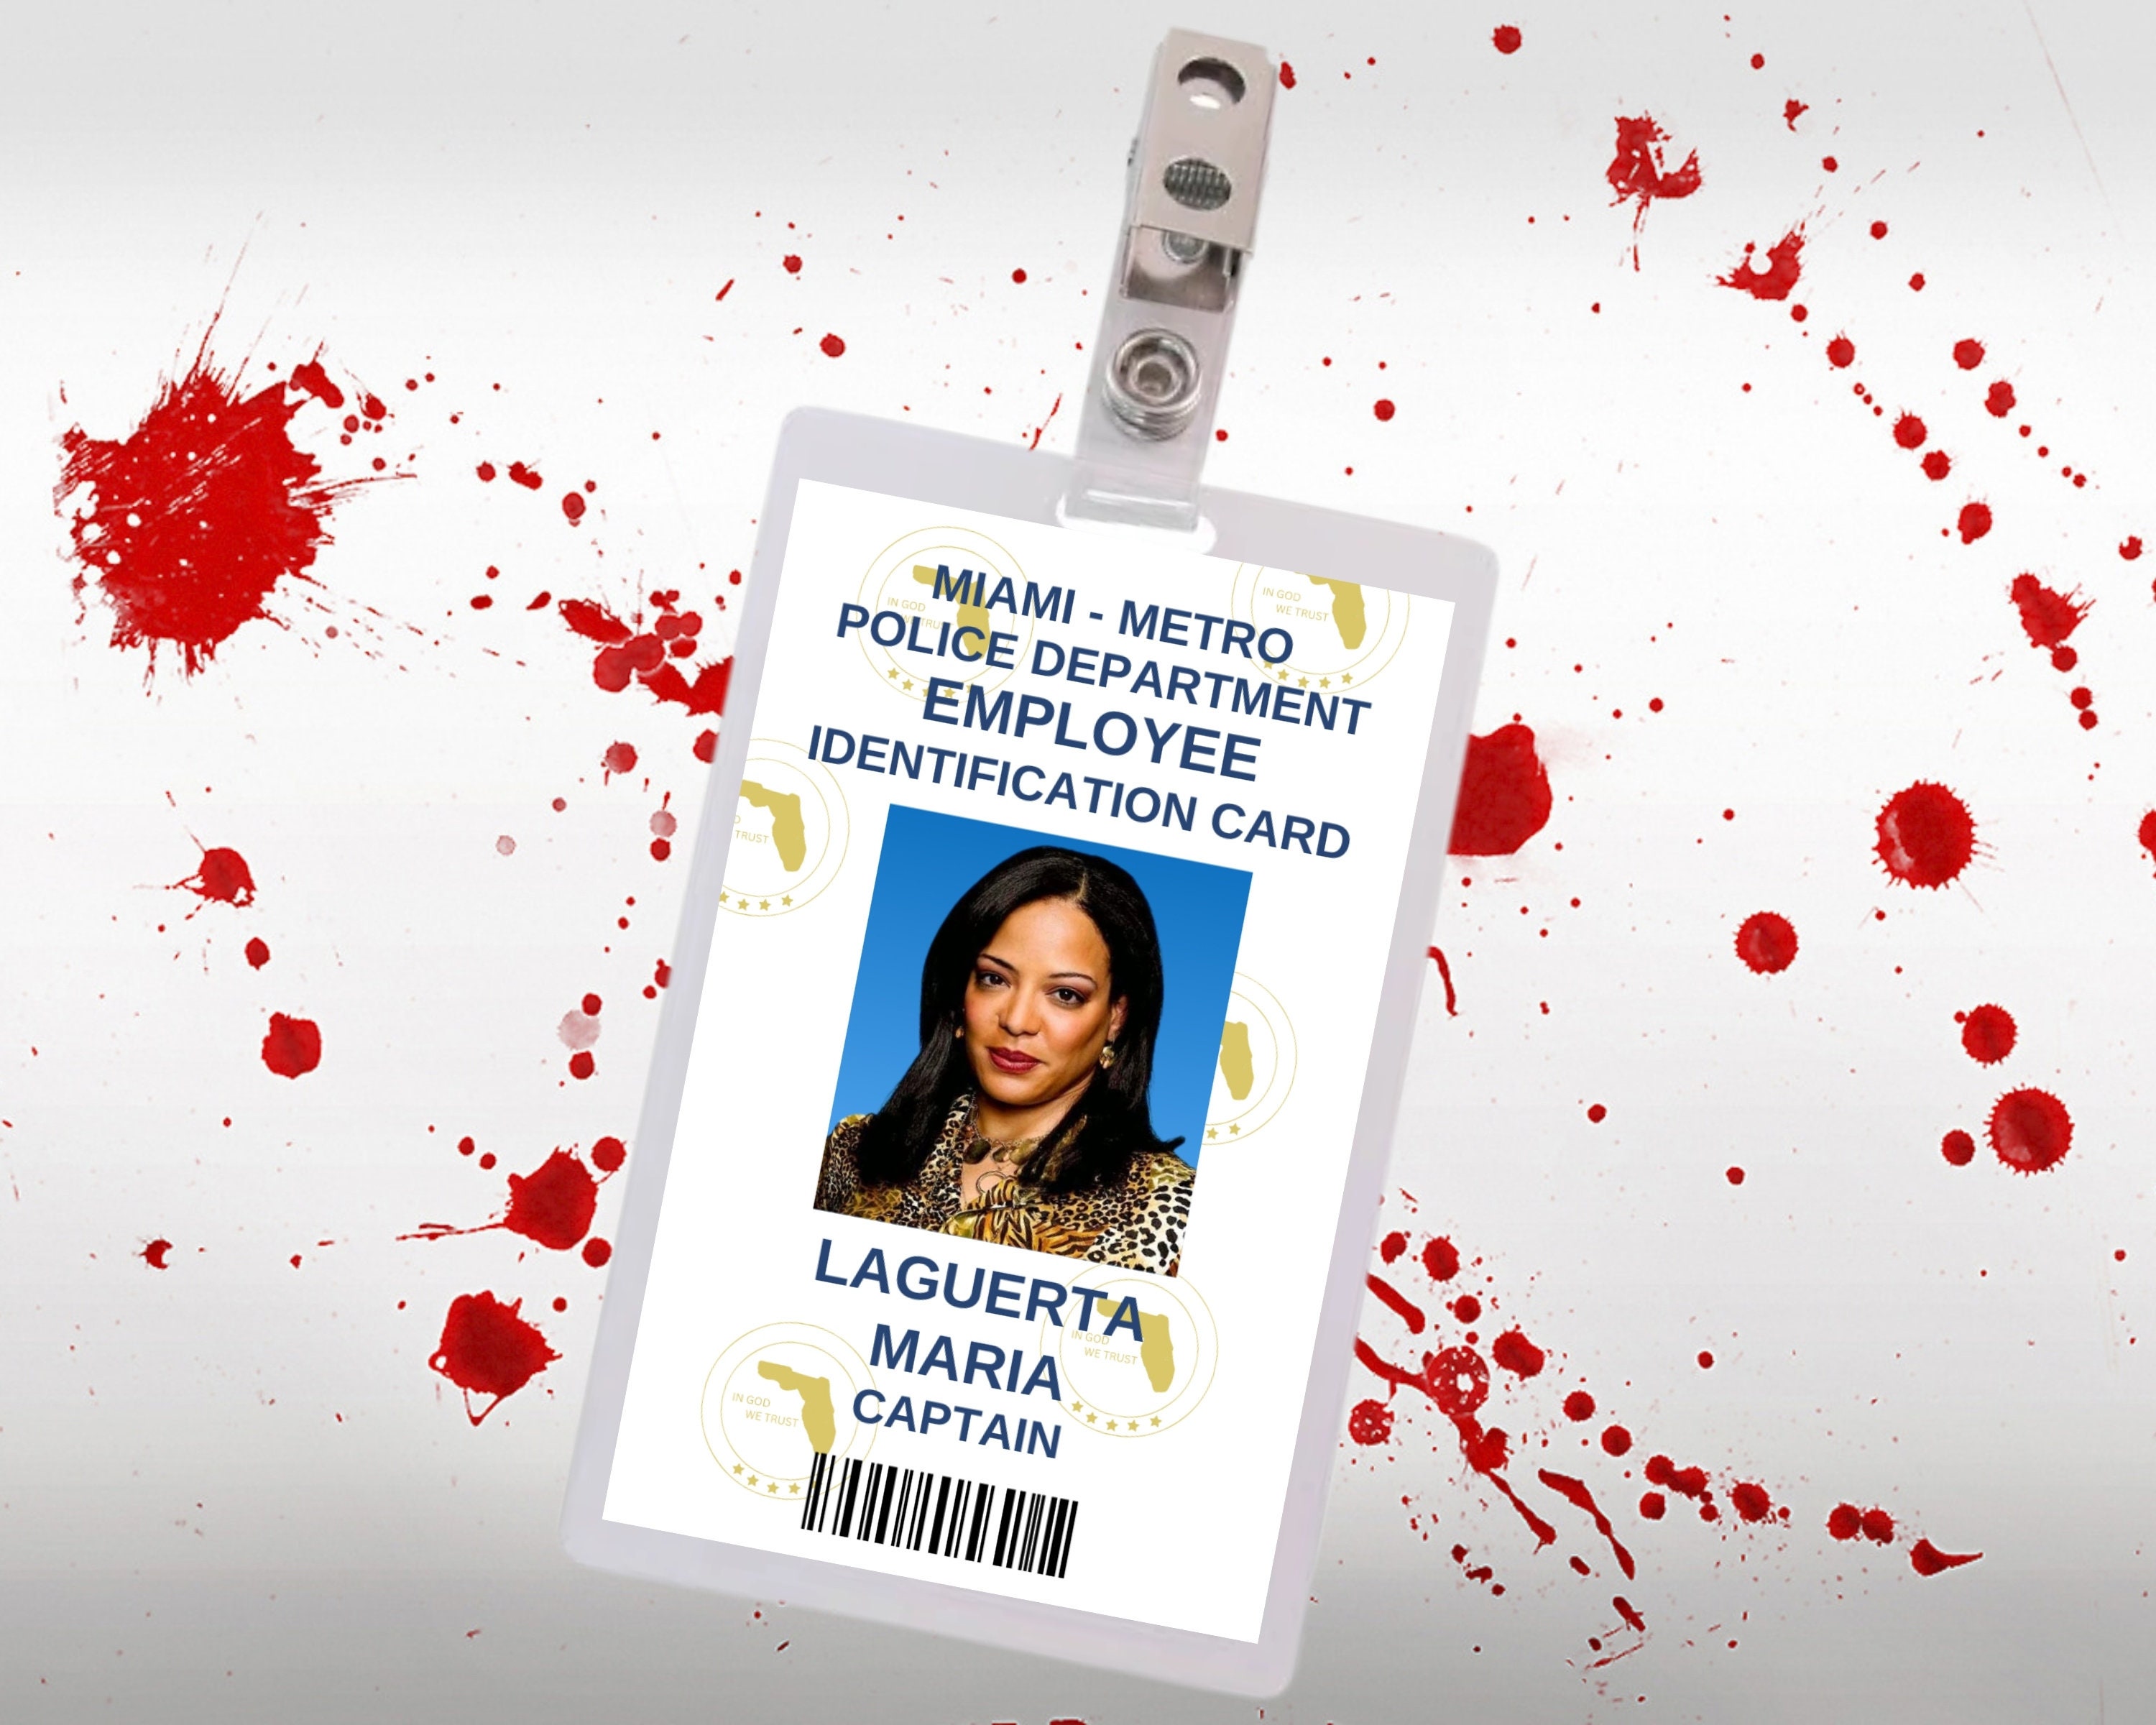 PRINTABLE MEAN GIRLS Id Badges, 8 Id cards, North Shore High, Cosplay  accessories, Replica, Name badge, Bachelorette